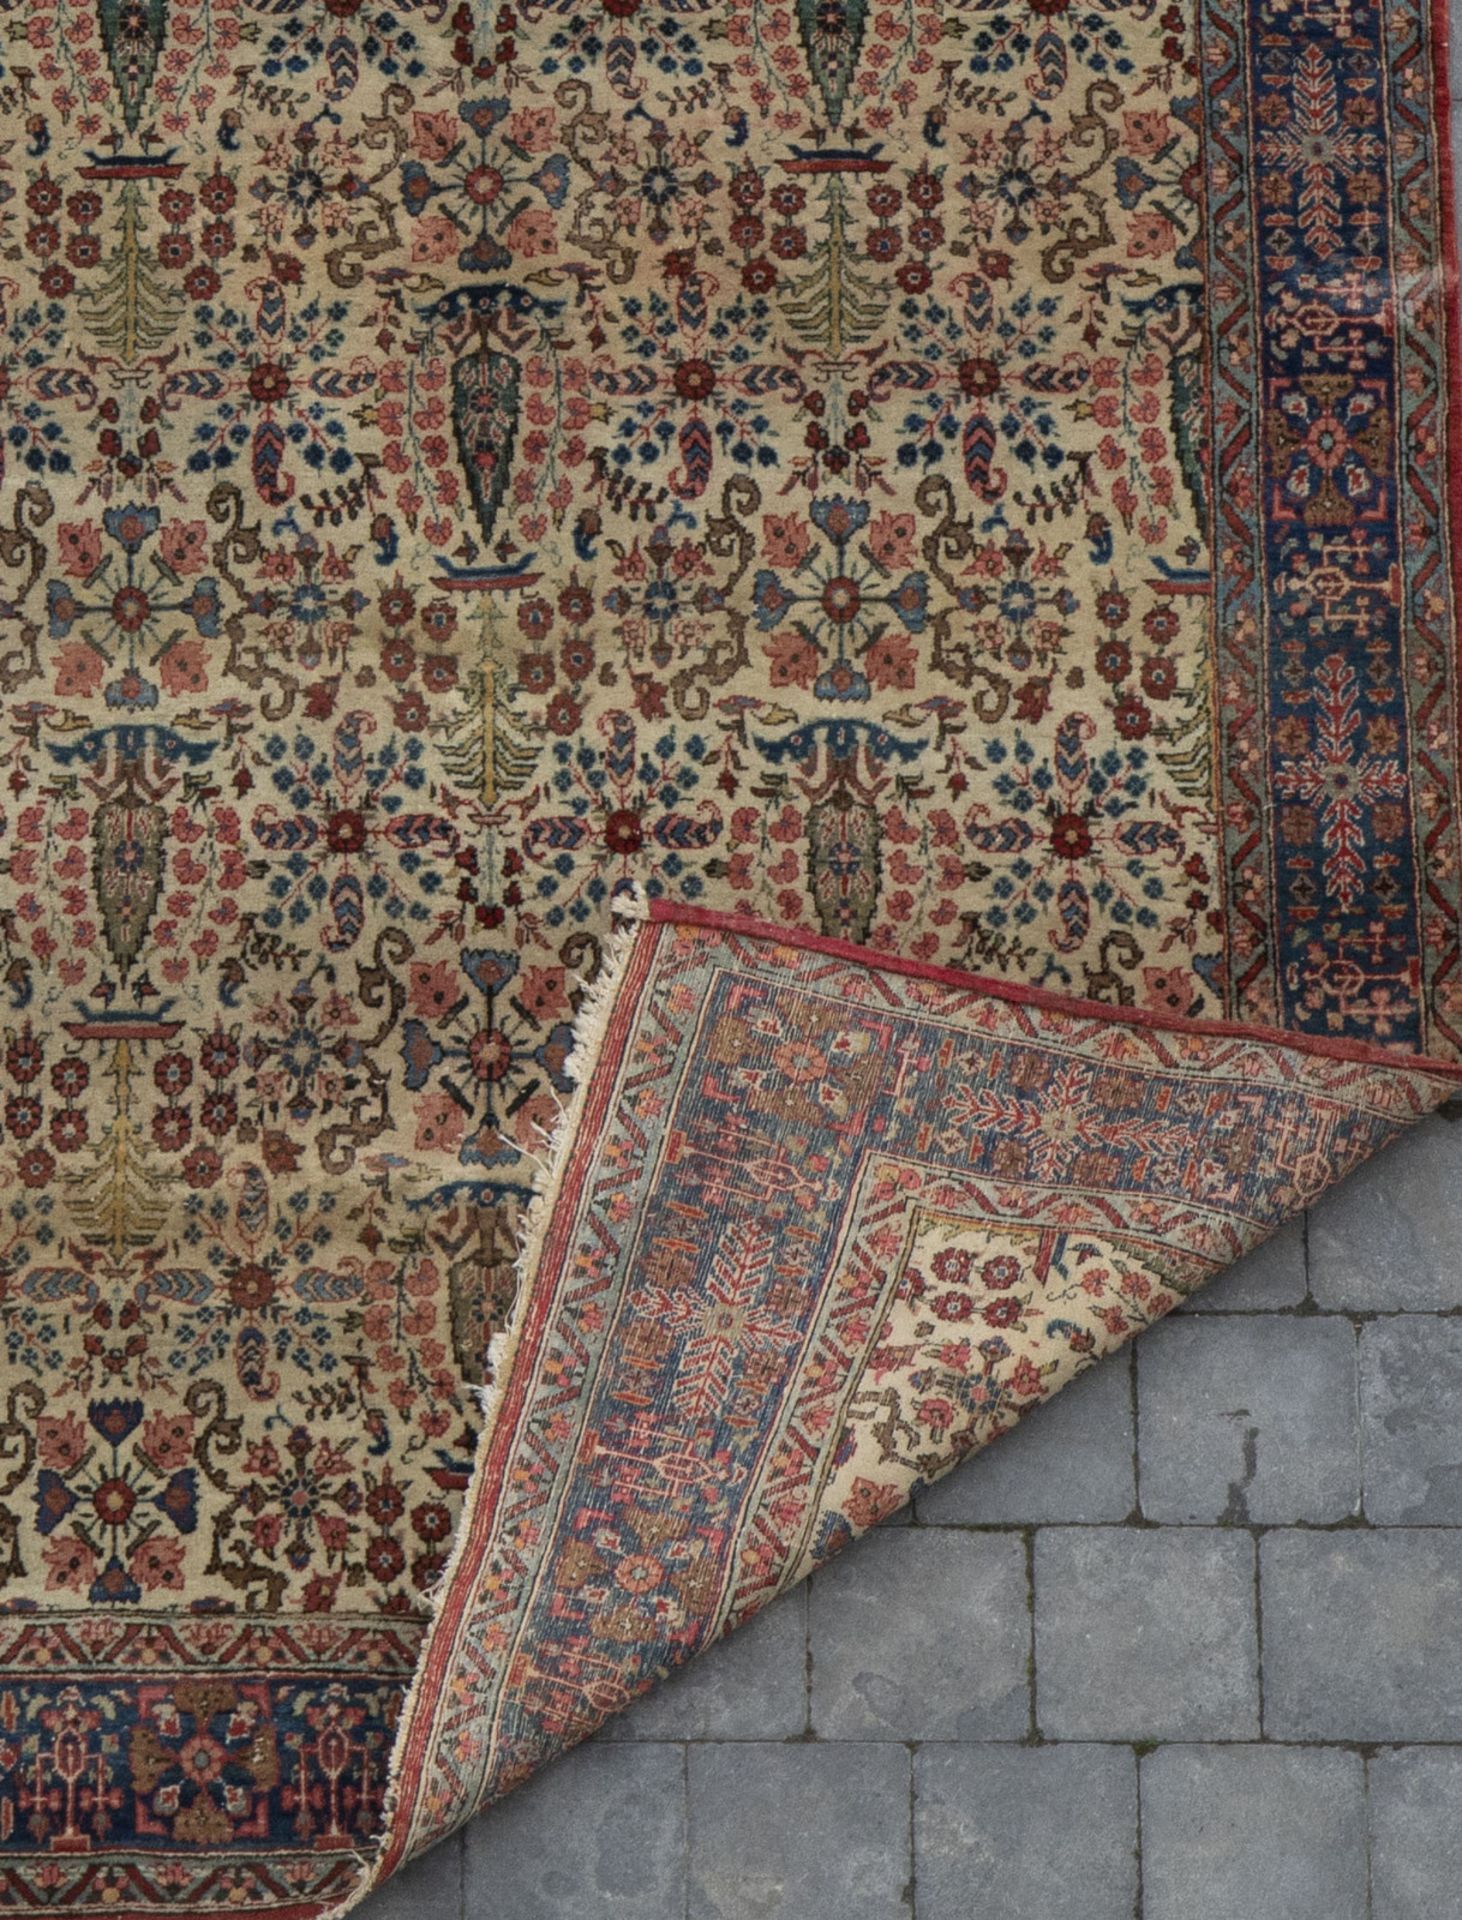 Two Oriental rugs with floral design, wool on cotton, 20th C. - Image 3 of 4